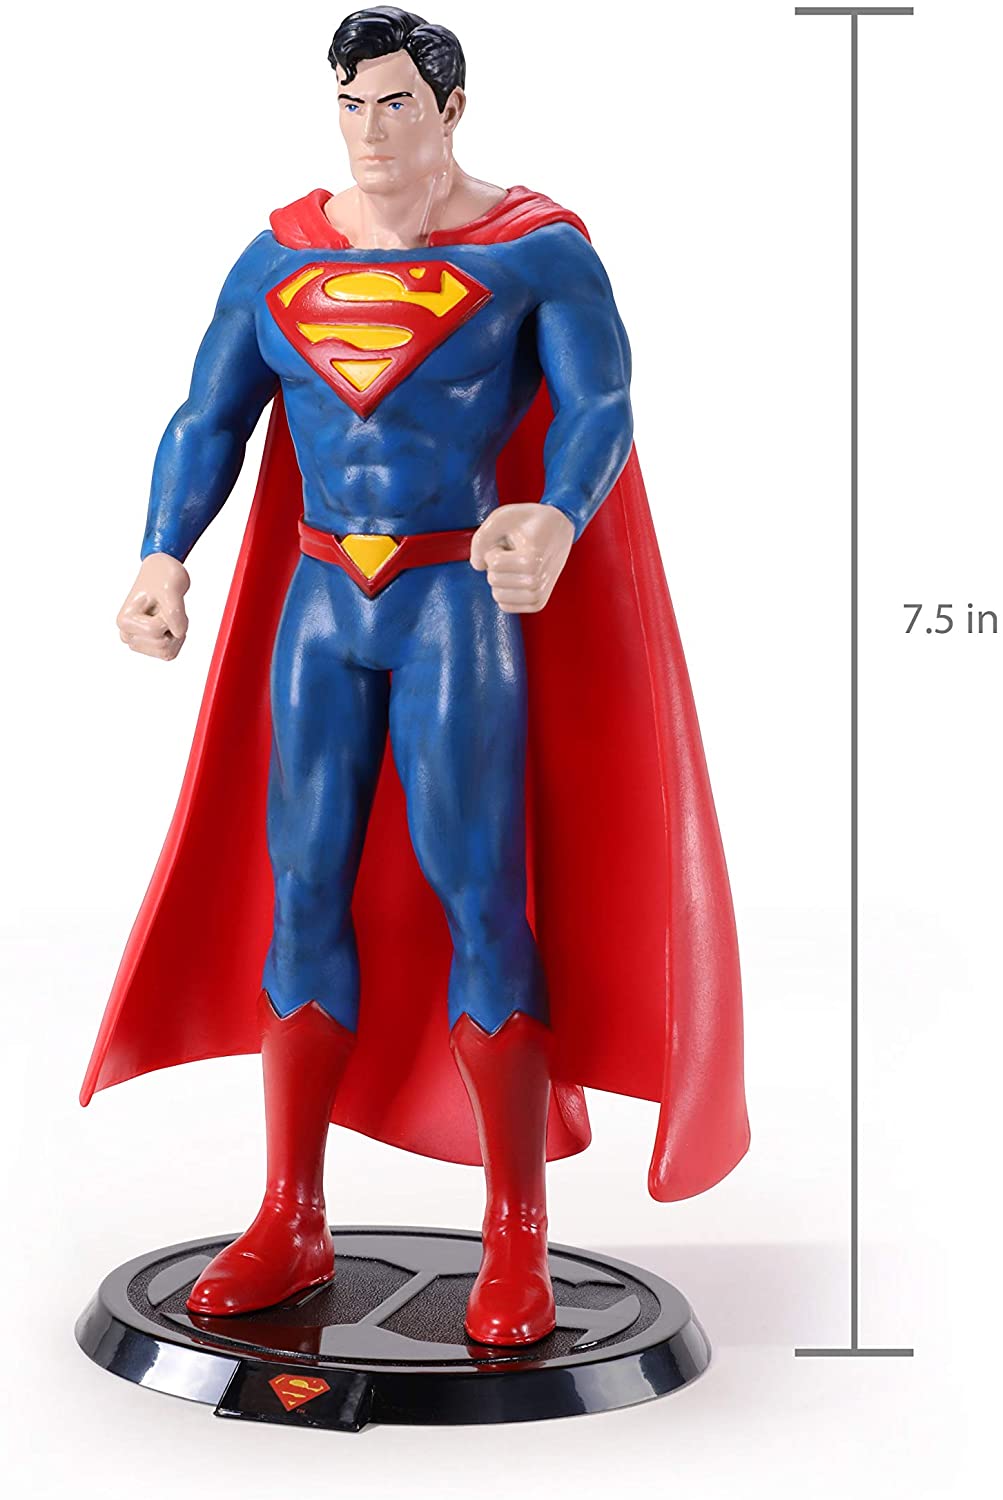 The Noble Collection DC Comics Bendyfigs Superman - 7.5in (19cm) Noble Toys DC Bendable Posable Collectible Doll Figures With Stand